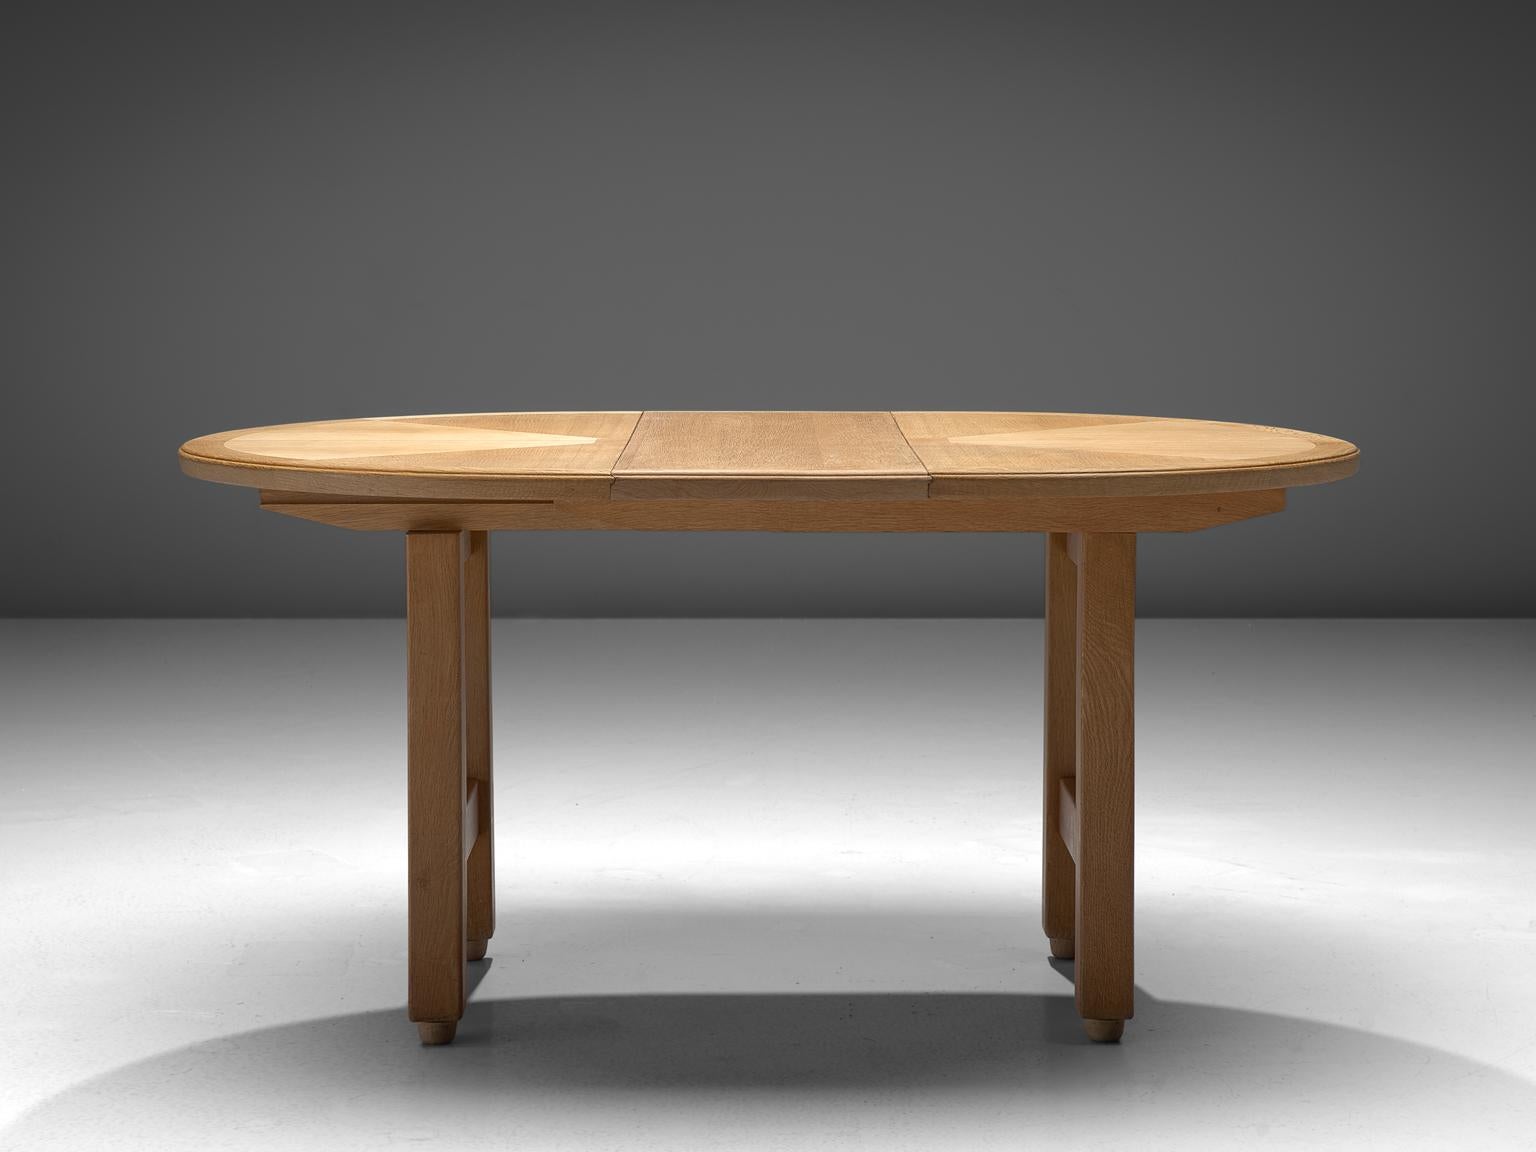 Guillerme et Chambron, extendable dining table, oak, 1960s.

Oval shaped dining table with inlayed top. This extendable table in solid oak comes with two optional leaves, which makes it a very versatile item. The sculptural two legged base has the